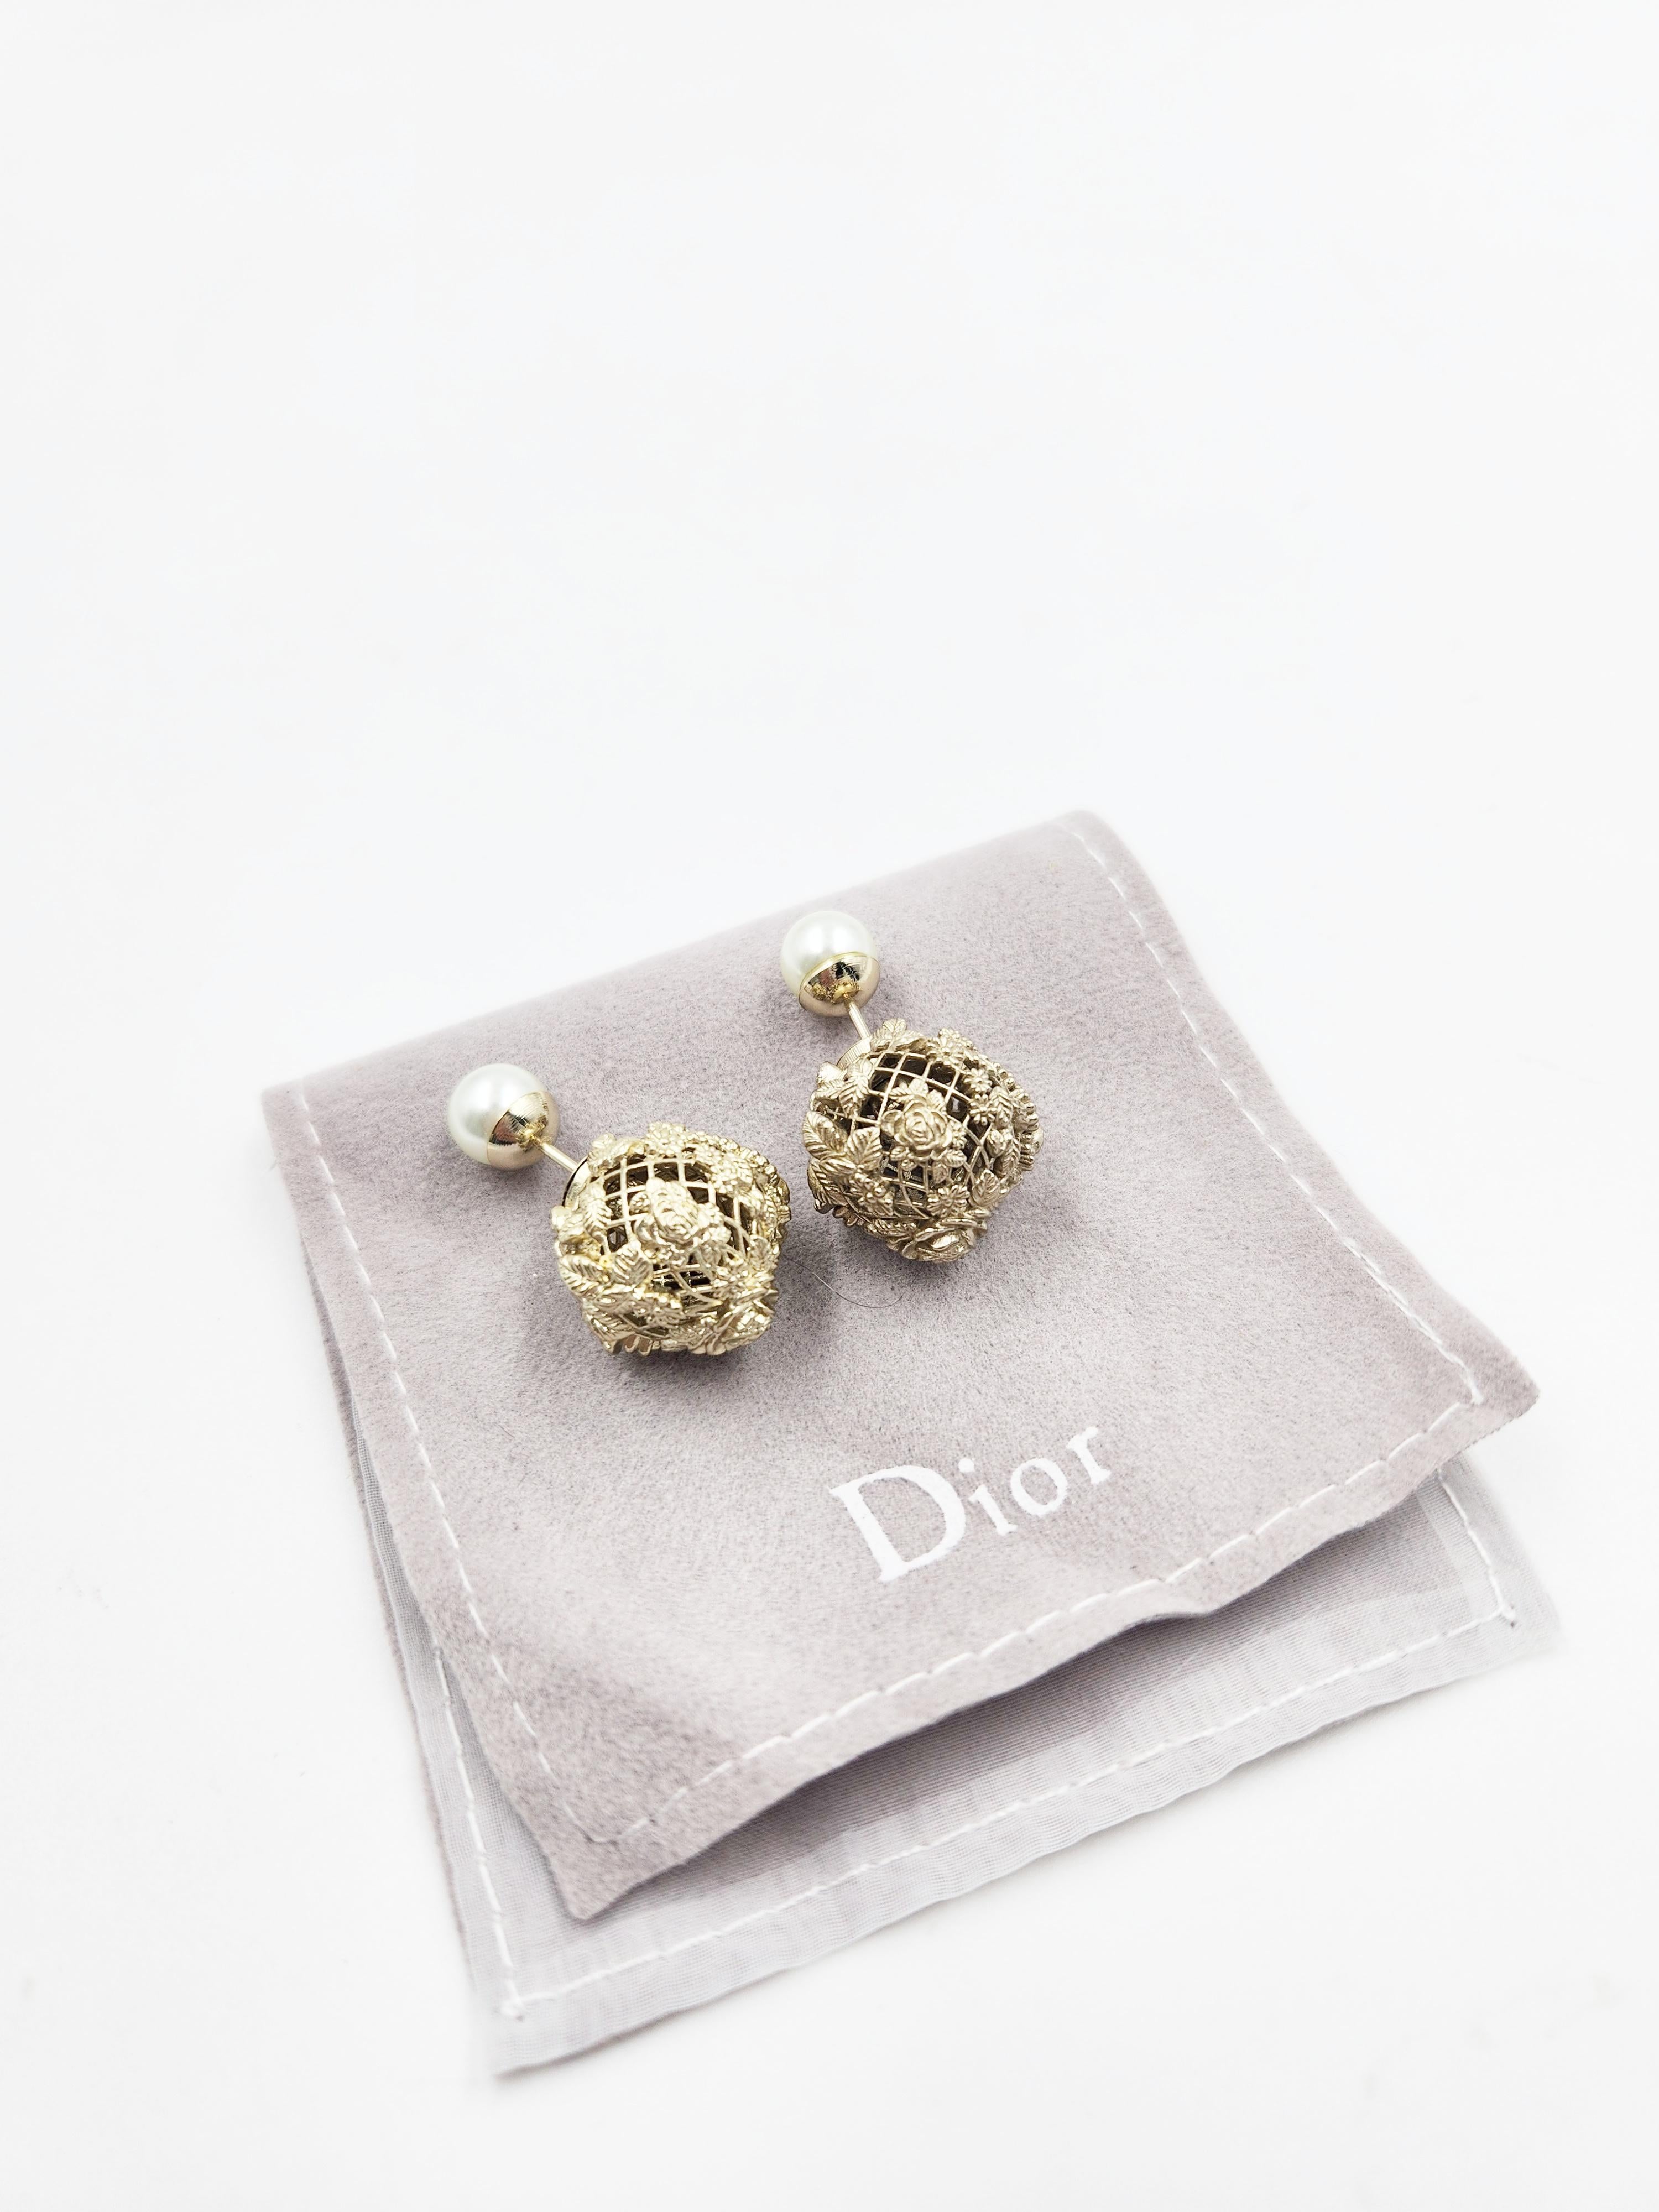 As seen at the fashion show, the Dior Tribales earrings reveal a floral inspiration in celebration of the collection's signature Andalusia theme. Hallmark resin pearls in the back reveal an openwork effect in gold-finish metal enhanced by a finely